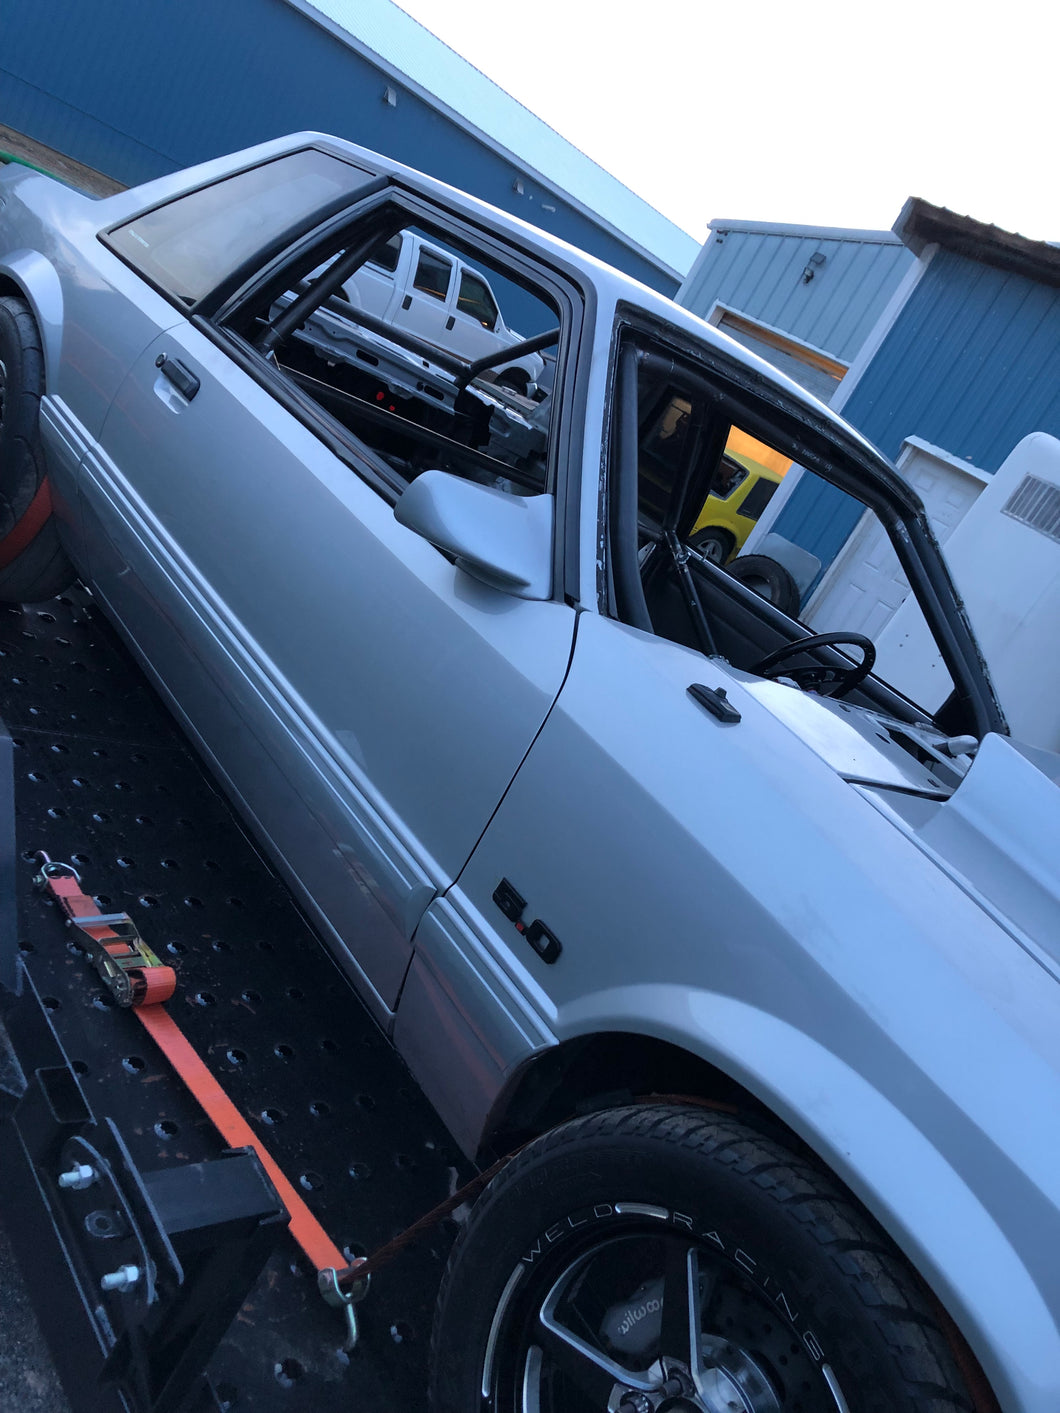 Foxbody coupe 10 point chromoly cage kit